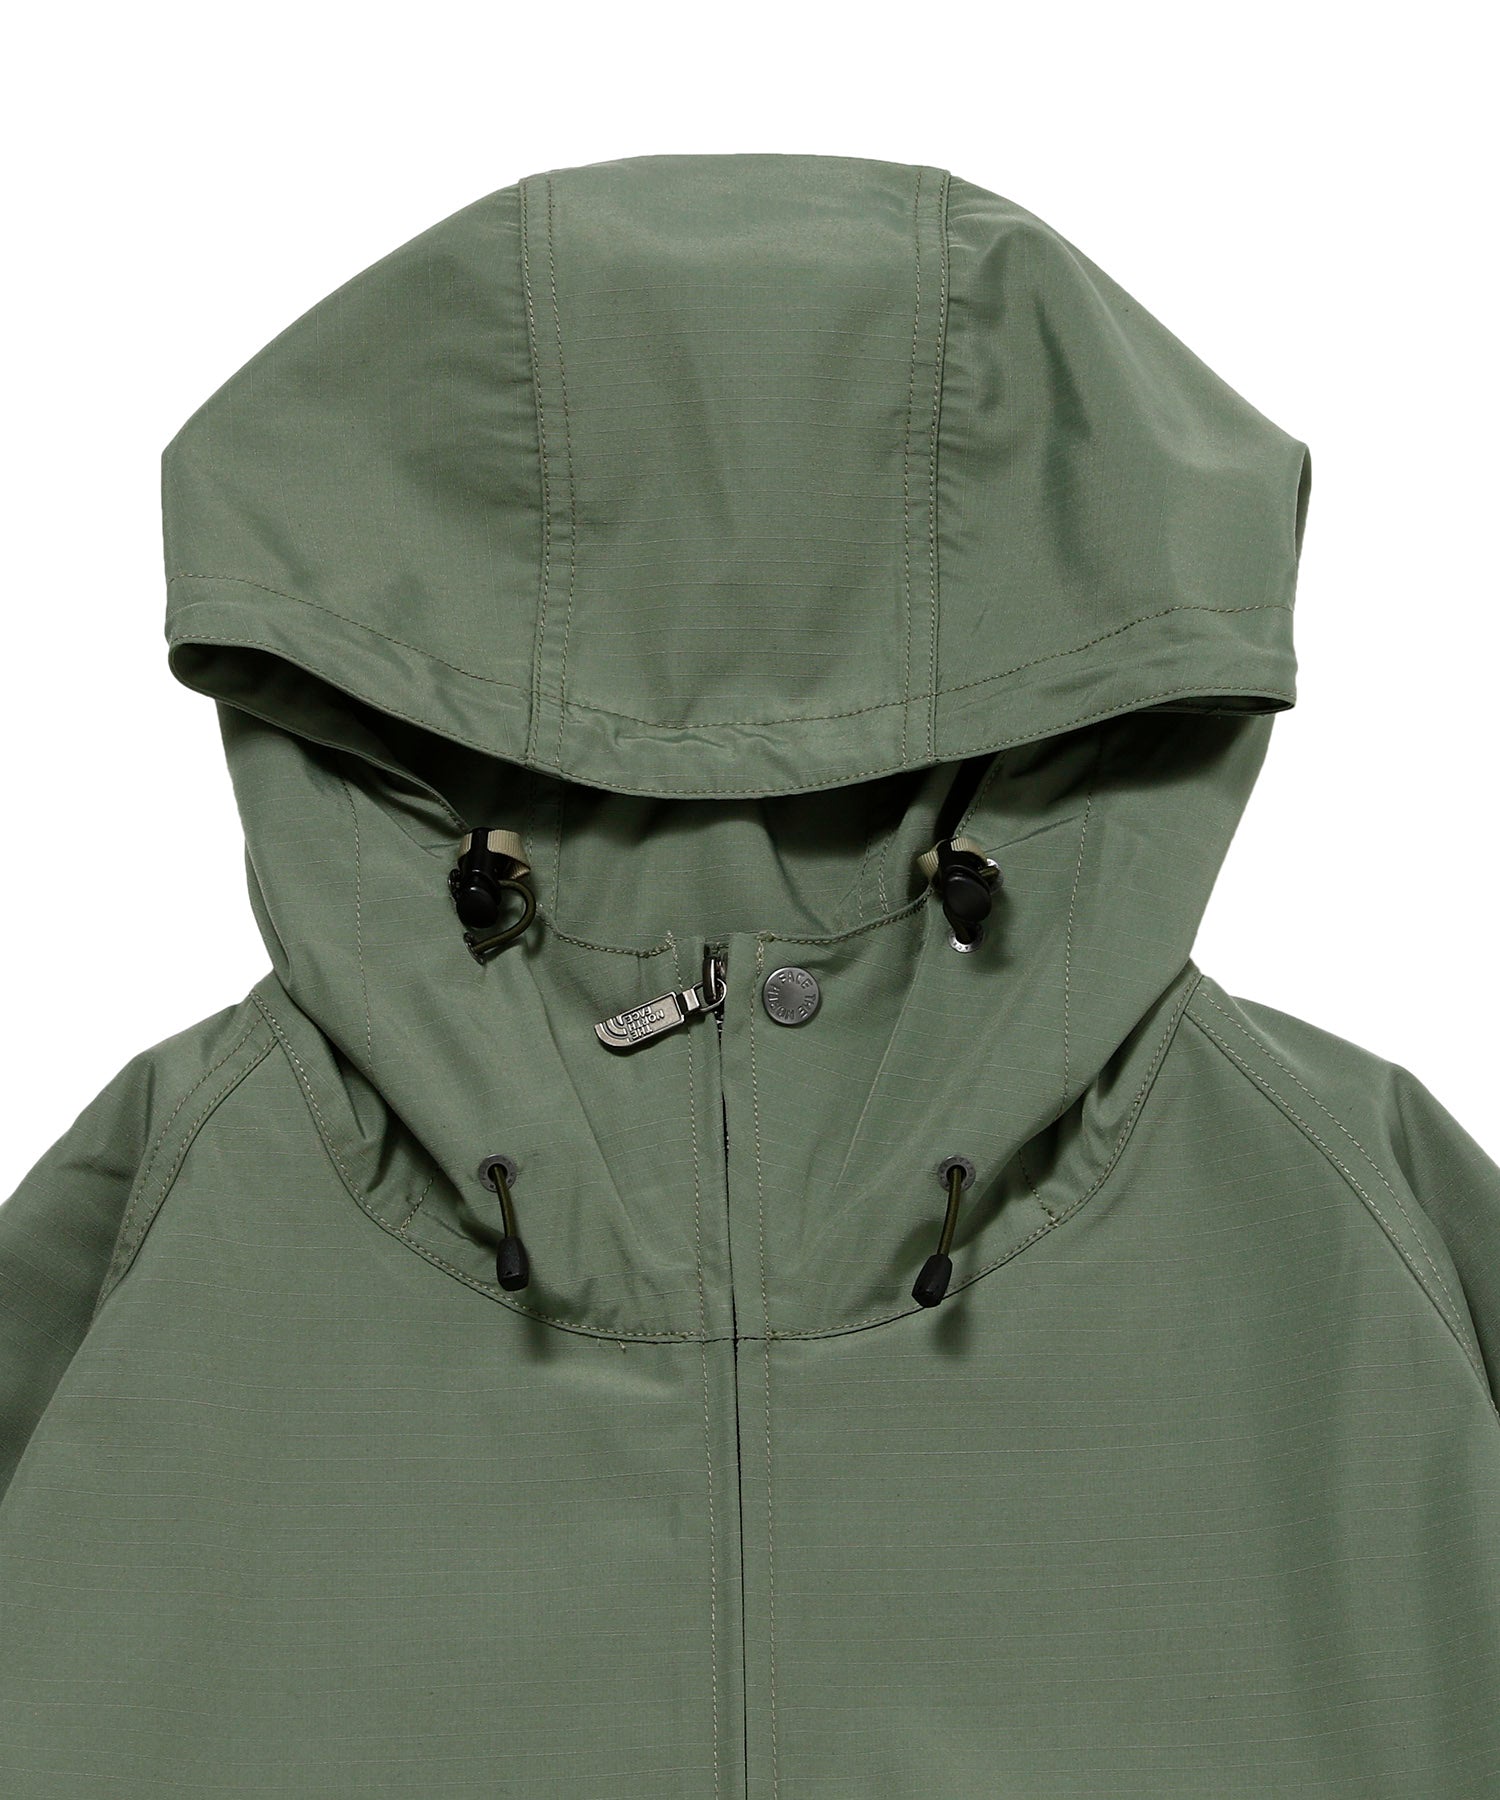 THE NORTH FACE PURPLE LABEL◇MOUNTAIN WIND PARKA/S/ポリエステル